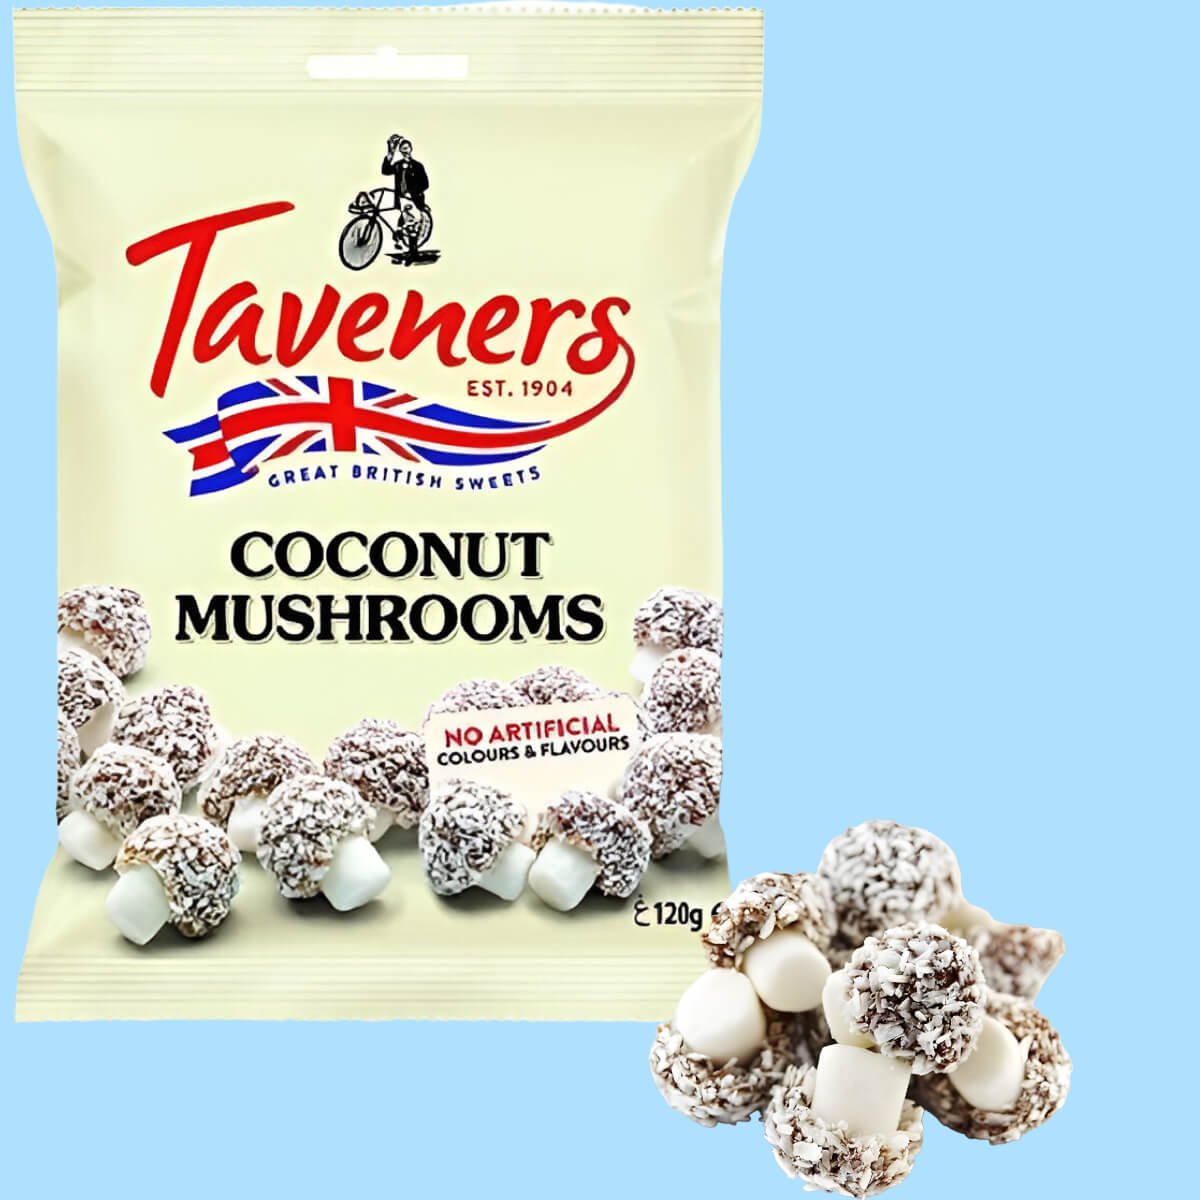 Bag of Taveners Coconut Mushrooms with loose sweets